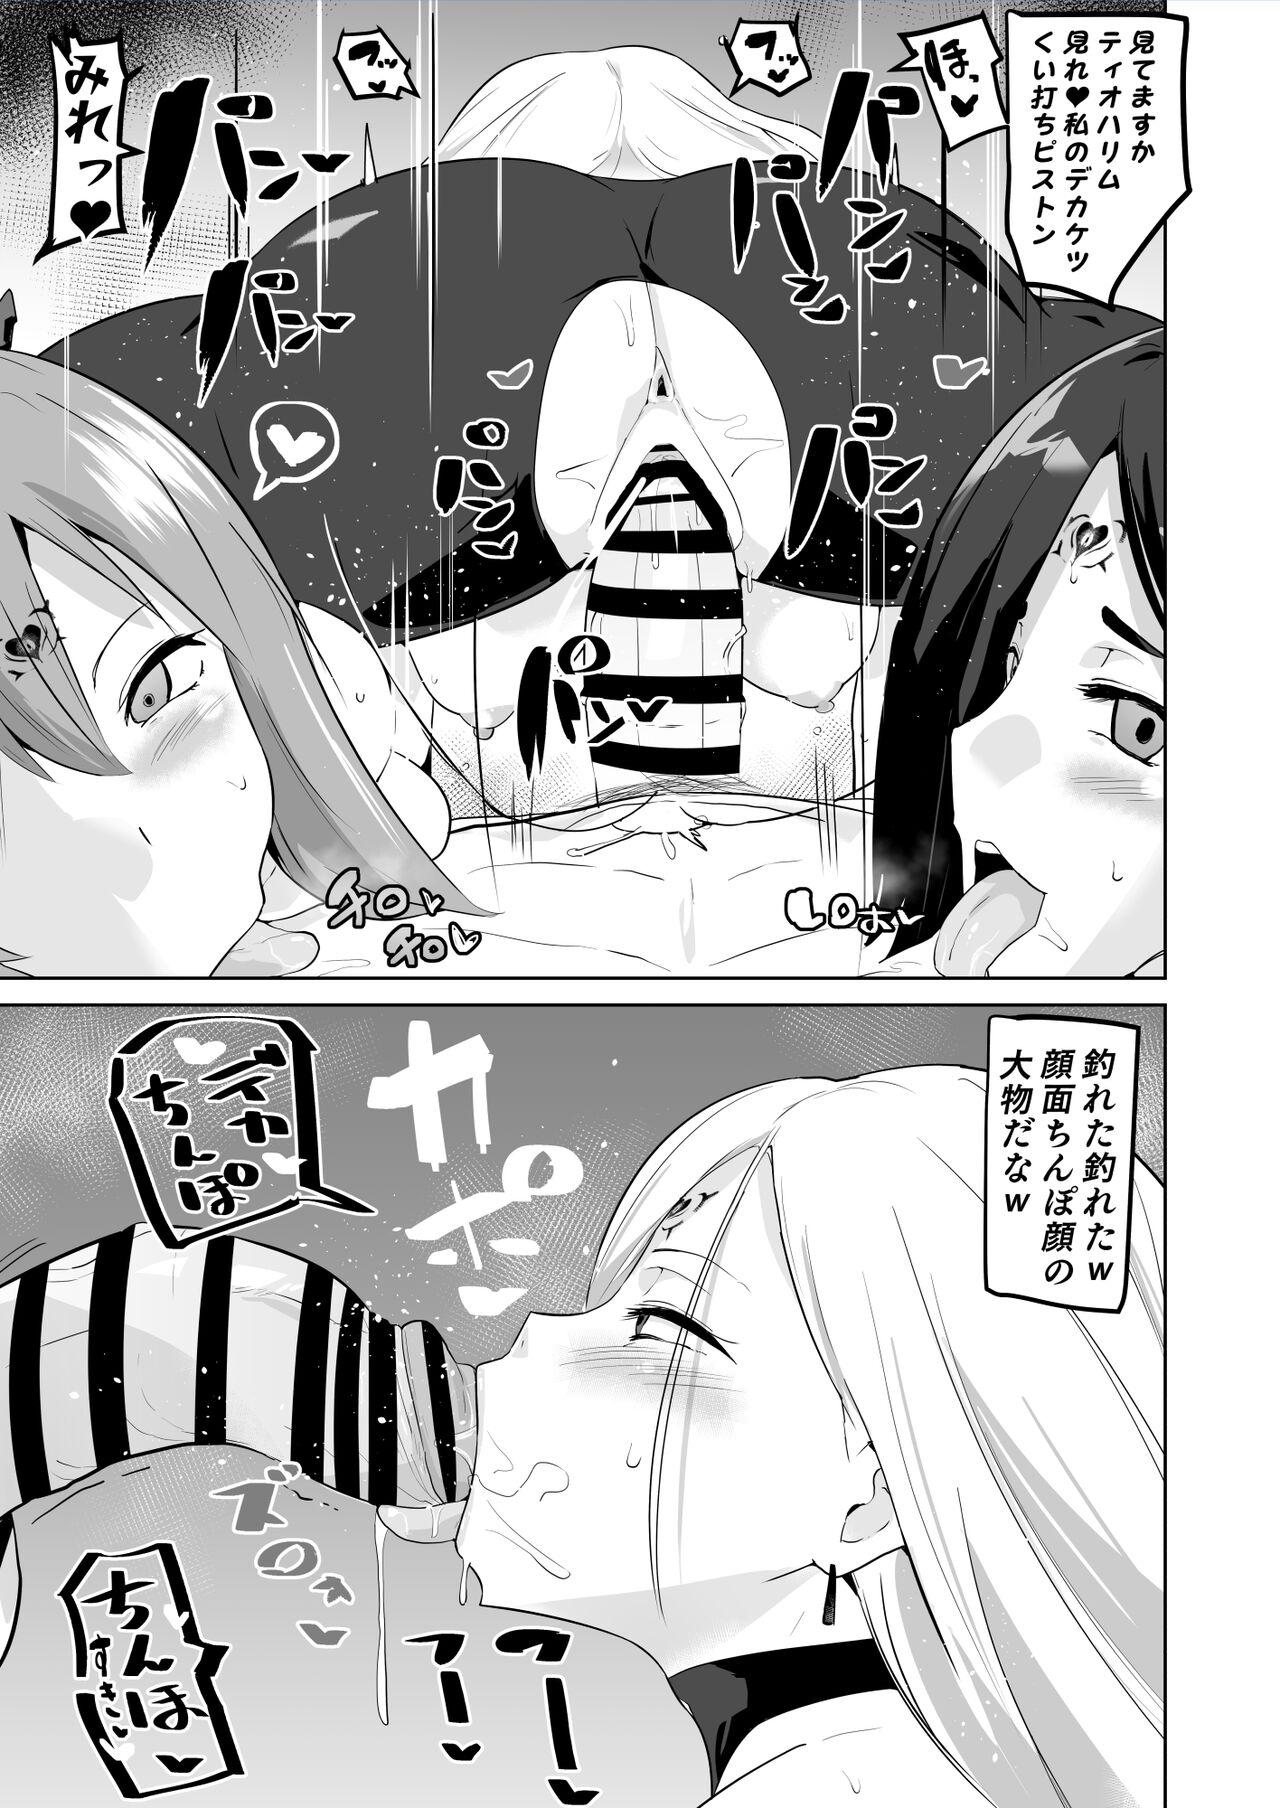 Chastity アライズカルト洗脳 - Tales of arise Butt Sex - Page 4